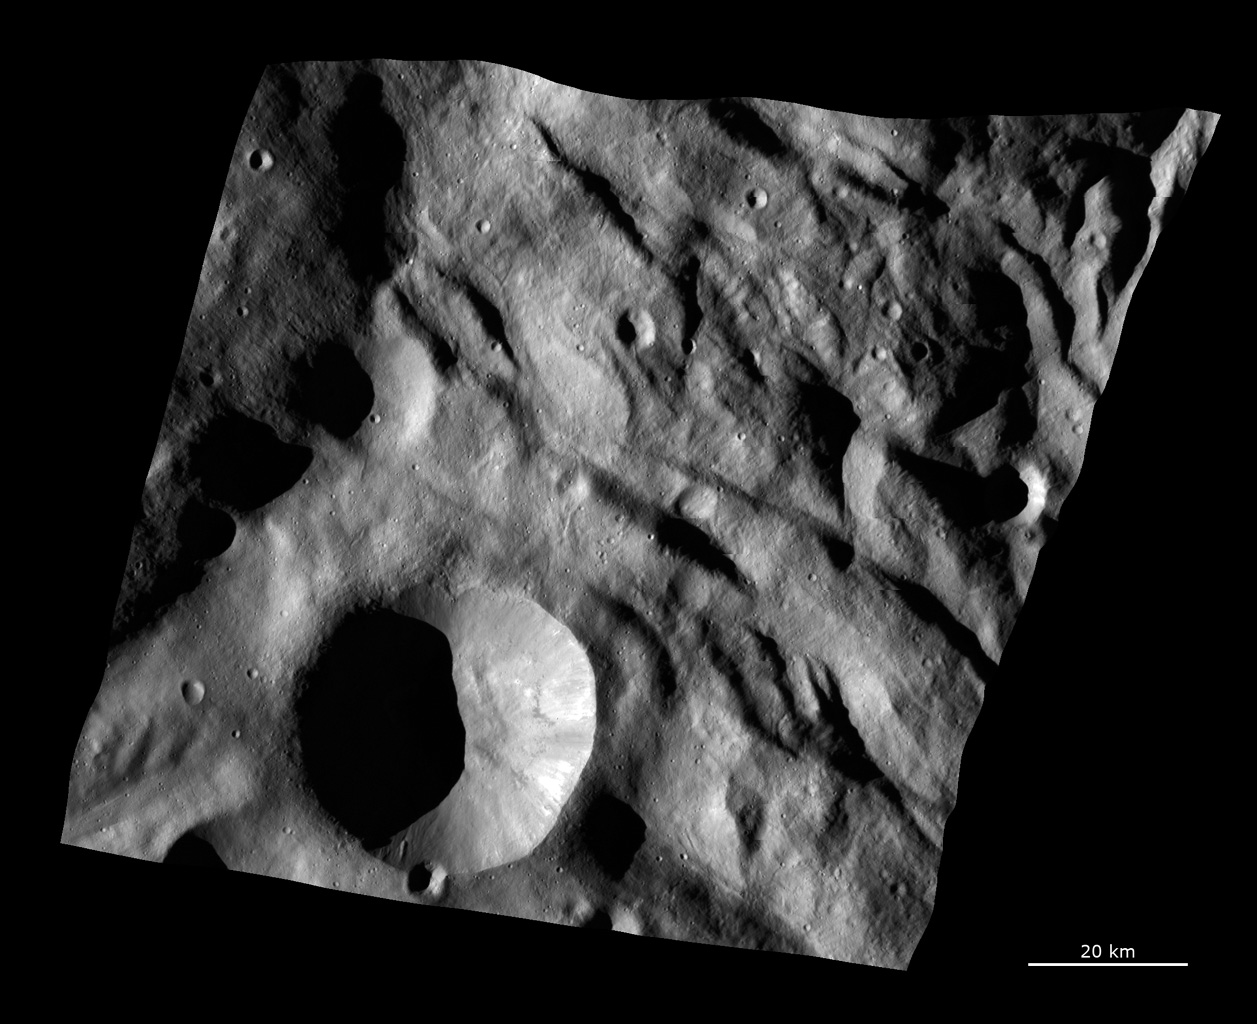 Complex Surface Texture in Vesta's Southern Hemisphere